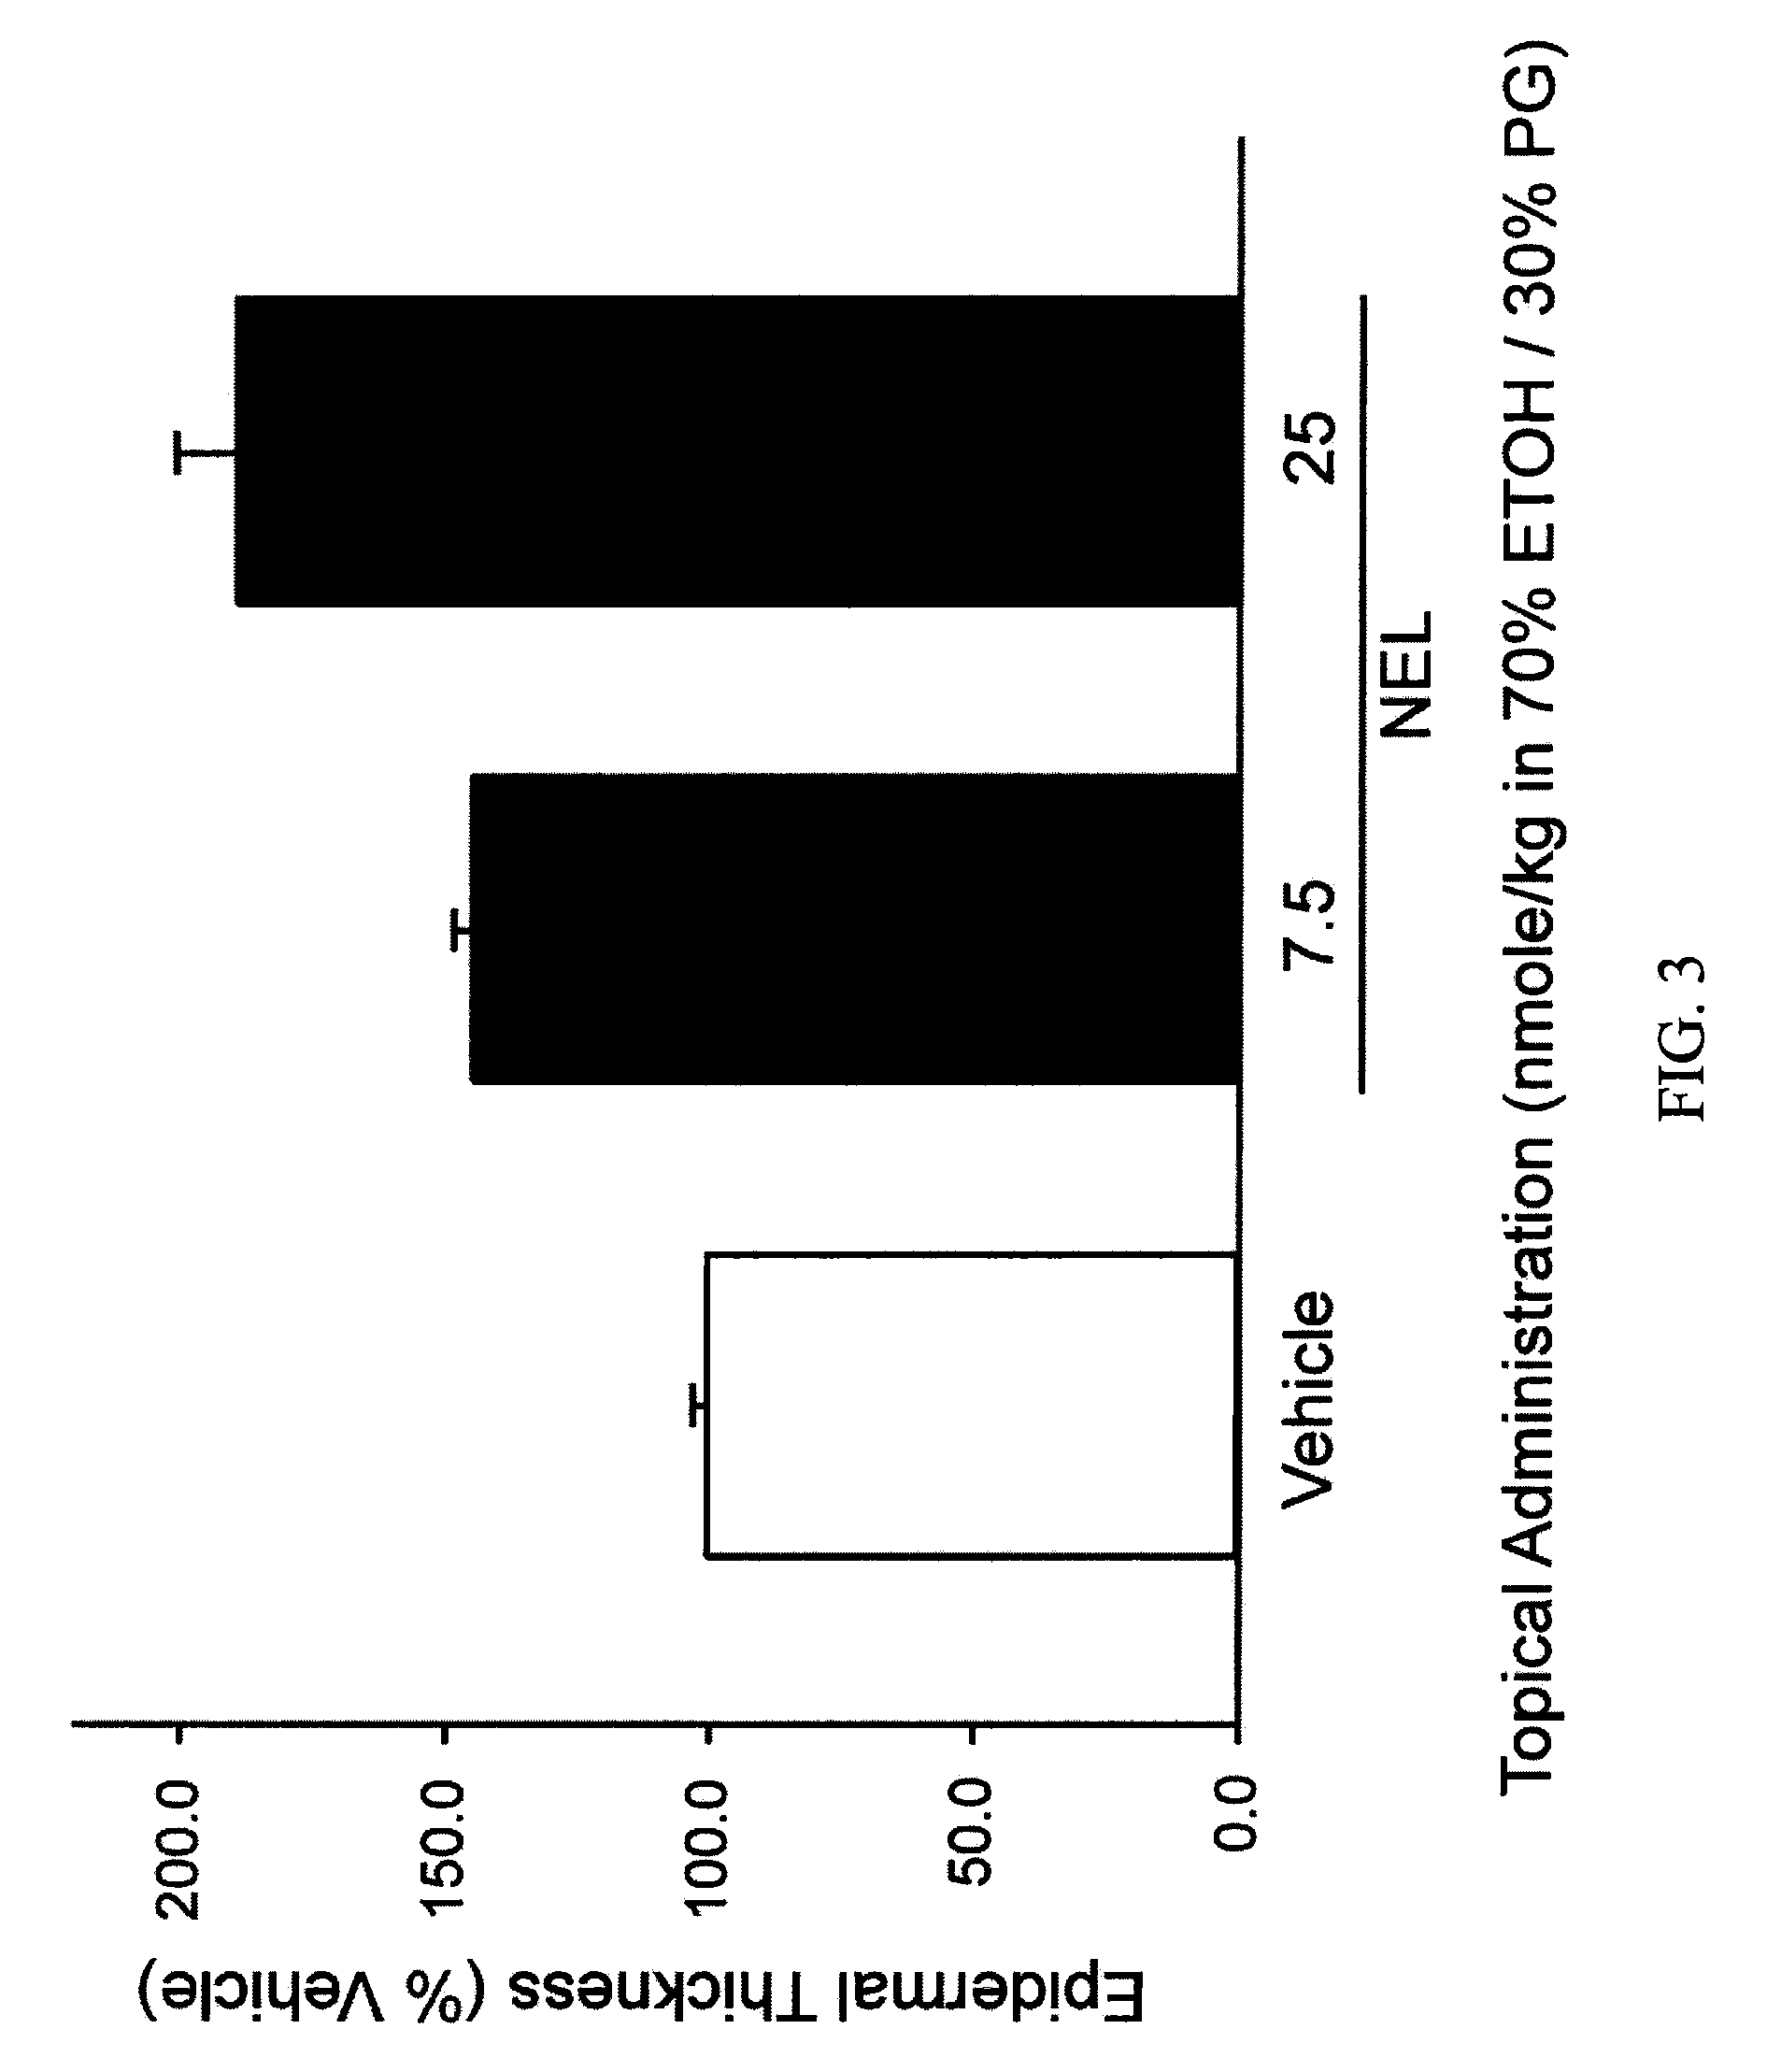 Methods of increasing epidermal skin thickness by topical administration of a 19-nor containing vitamin d compound